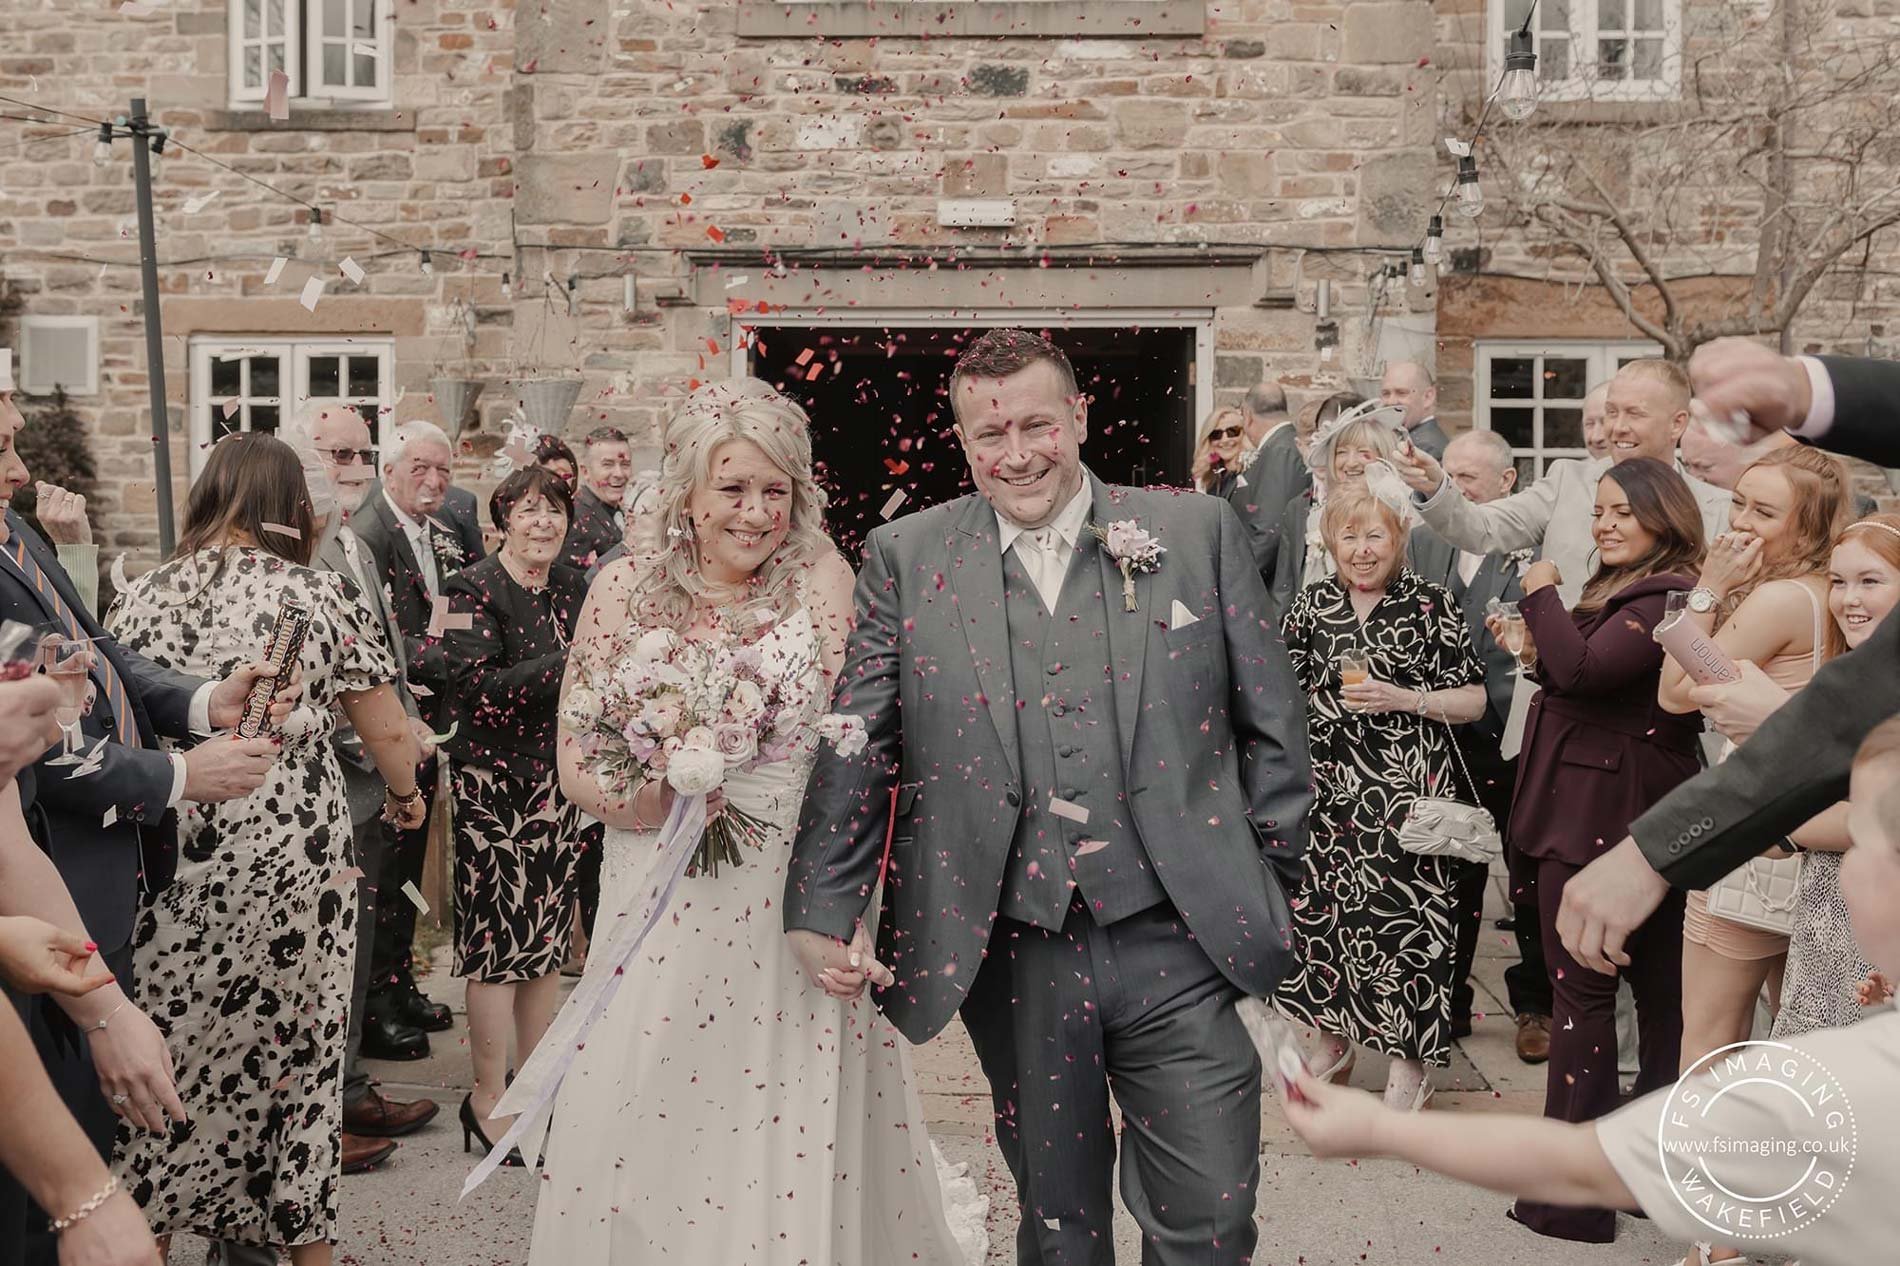  With a beautiful stone building behind them, the bride and groom are walking towards the camera with their wedding guests who are throwing confetti either side.   The bride is wearing a sleeveless, long white wedding dress and is holding her soft pa